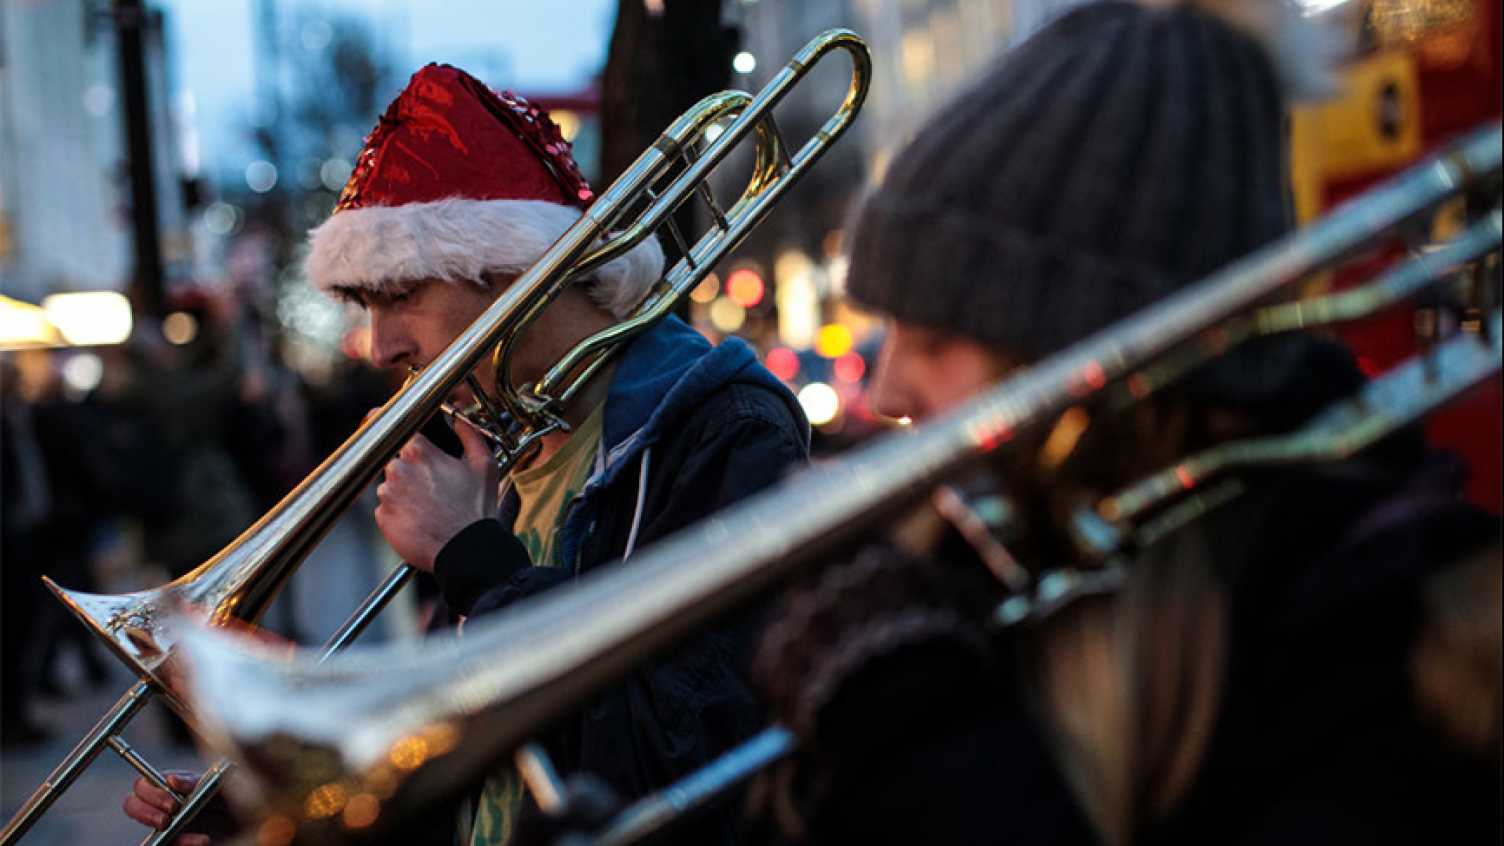 Thumbnail for Brass bands can improve your health and wellbeing, study shows | Faculty of Arts…